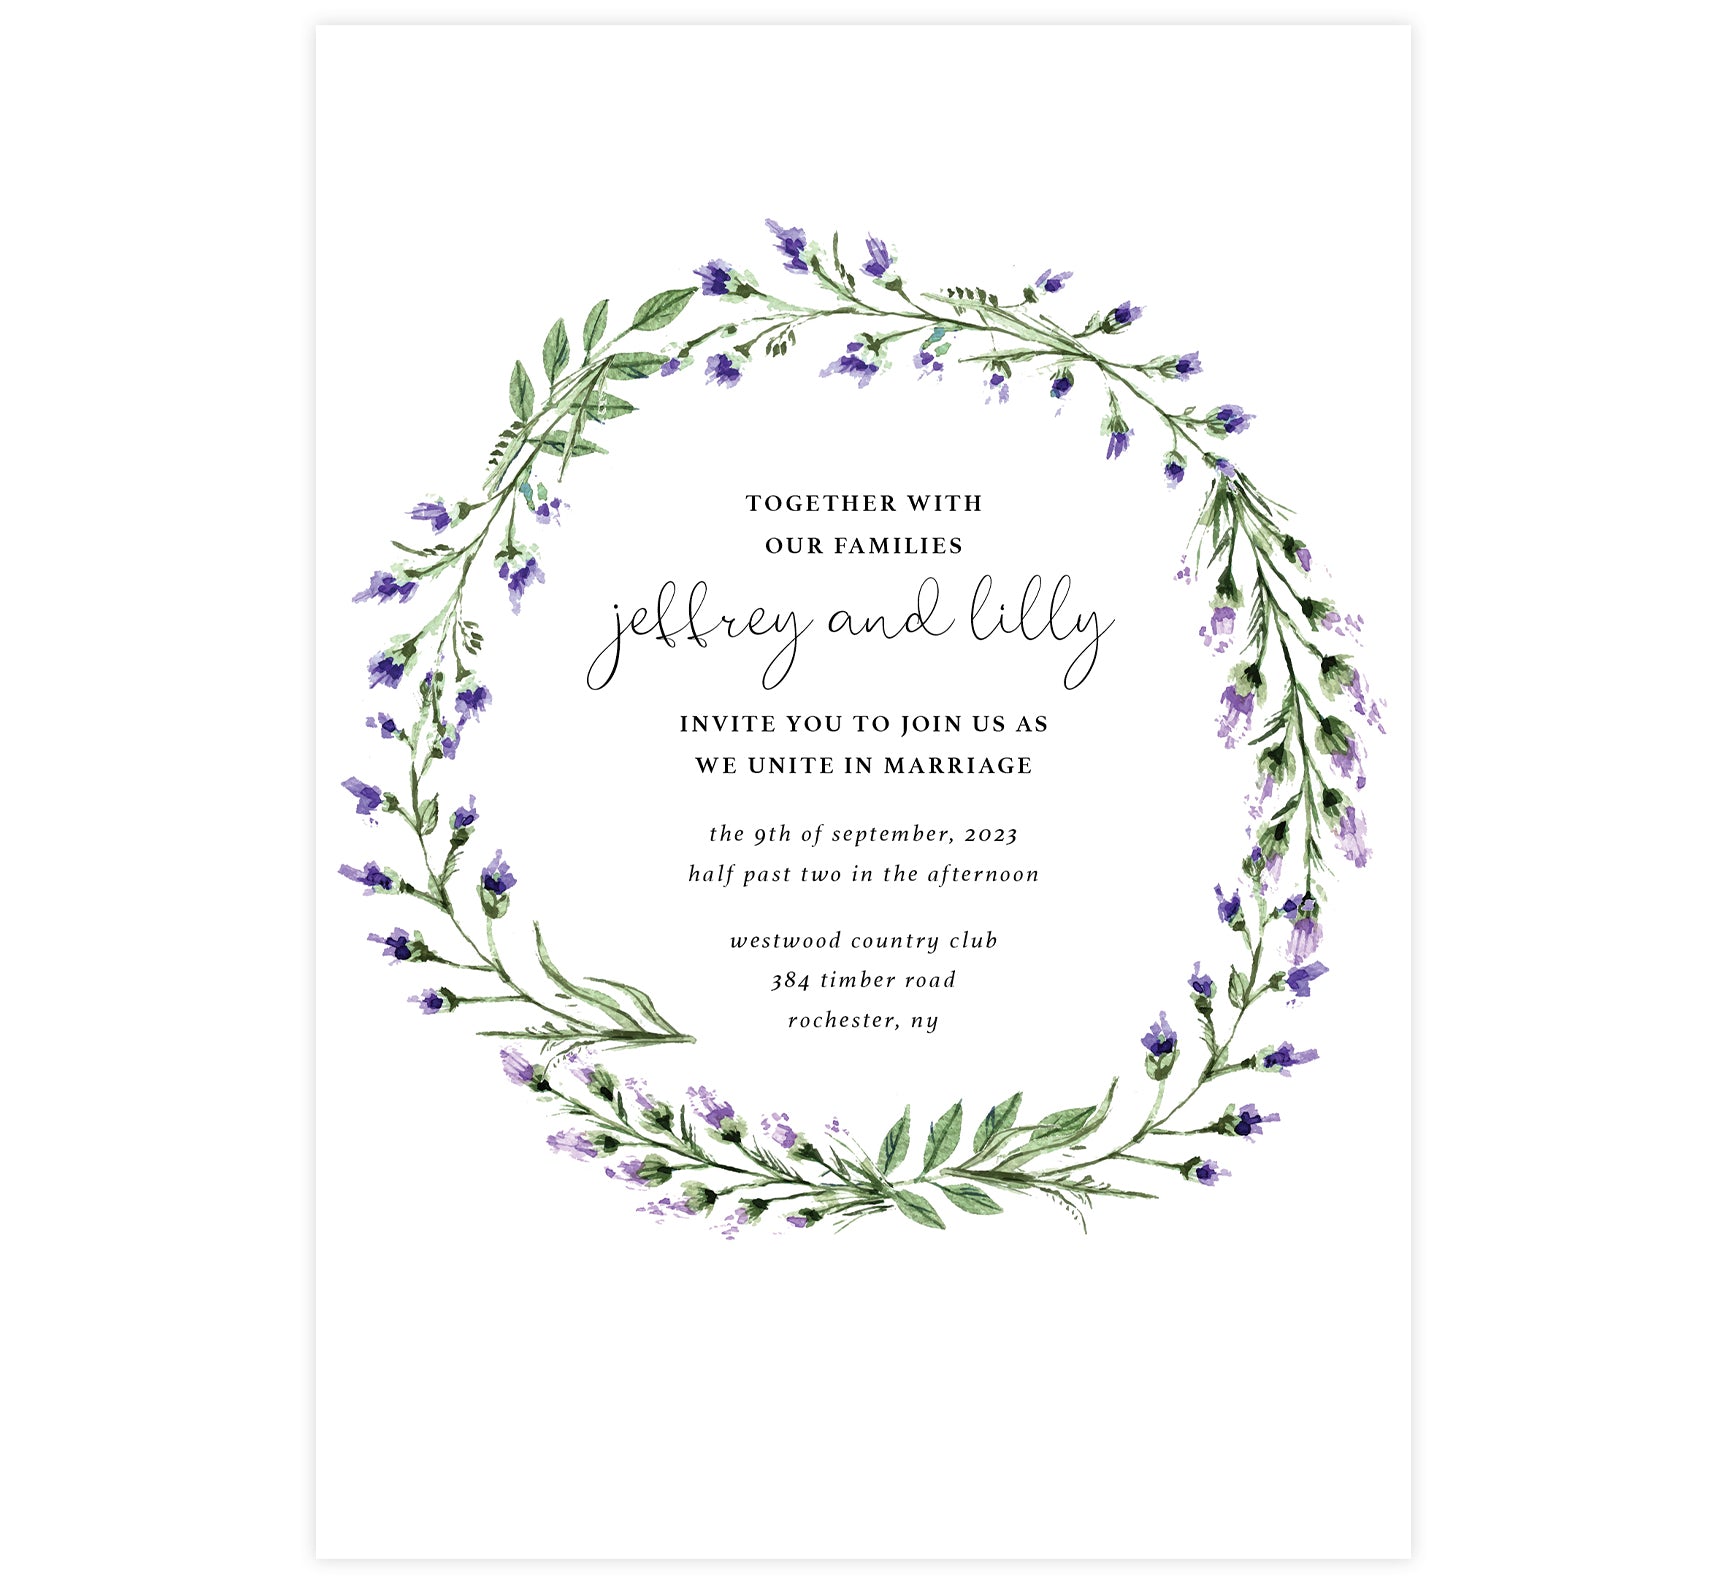 Lavender Wreath wedding invitation; white background with watercolor lavender leaves wreath surrounding the text